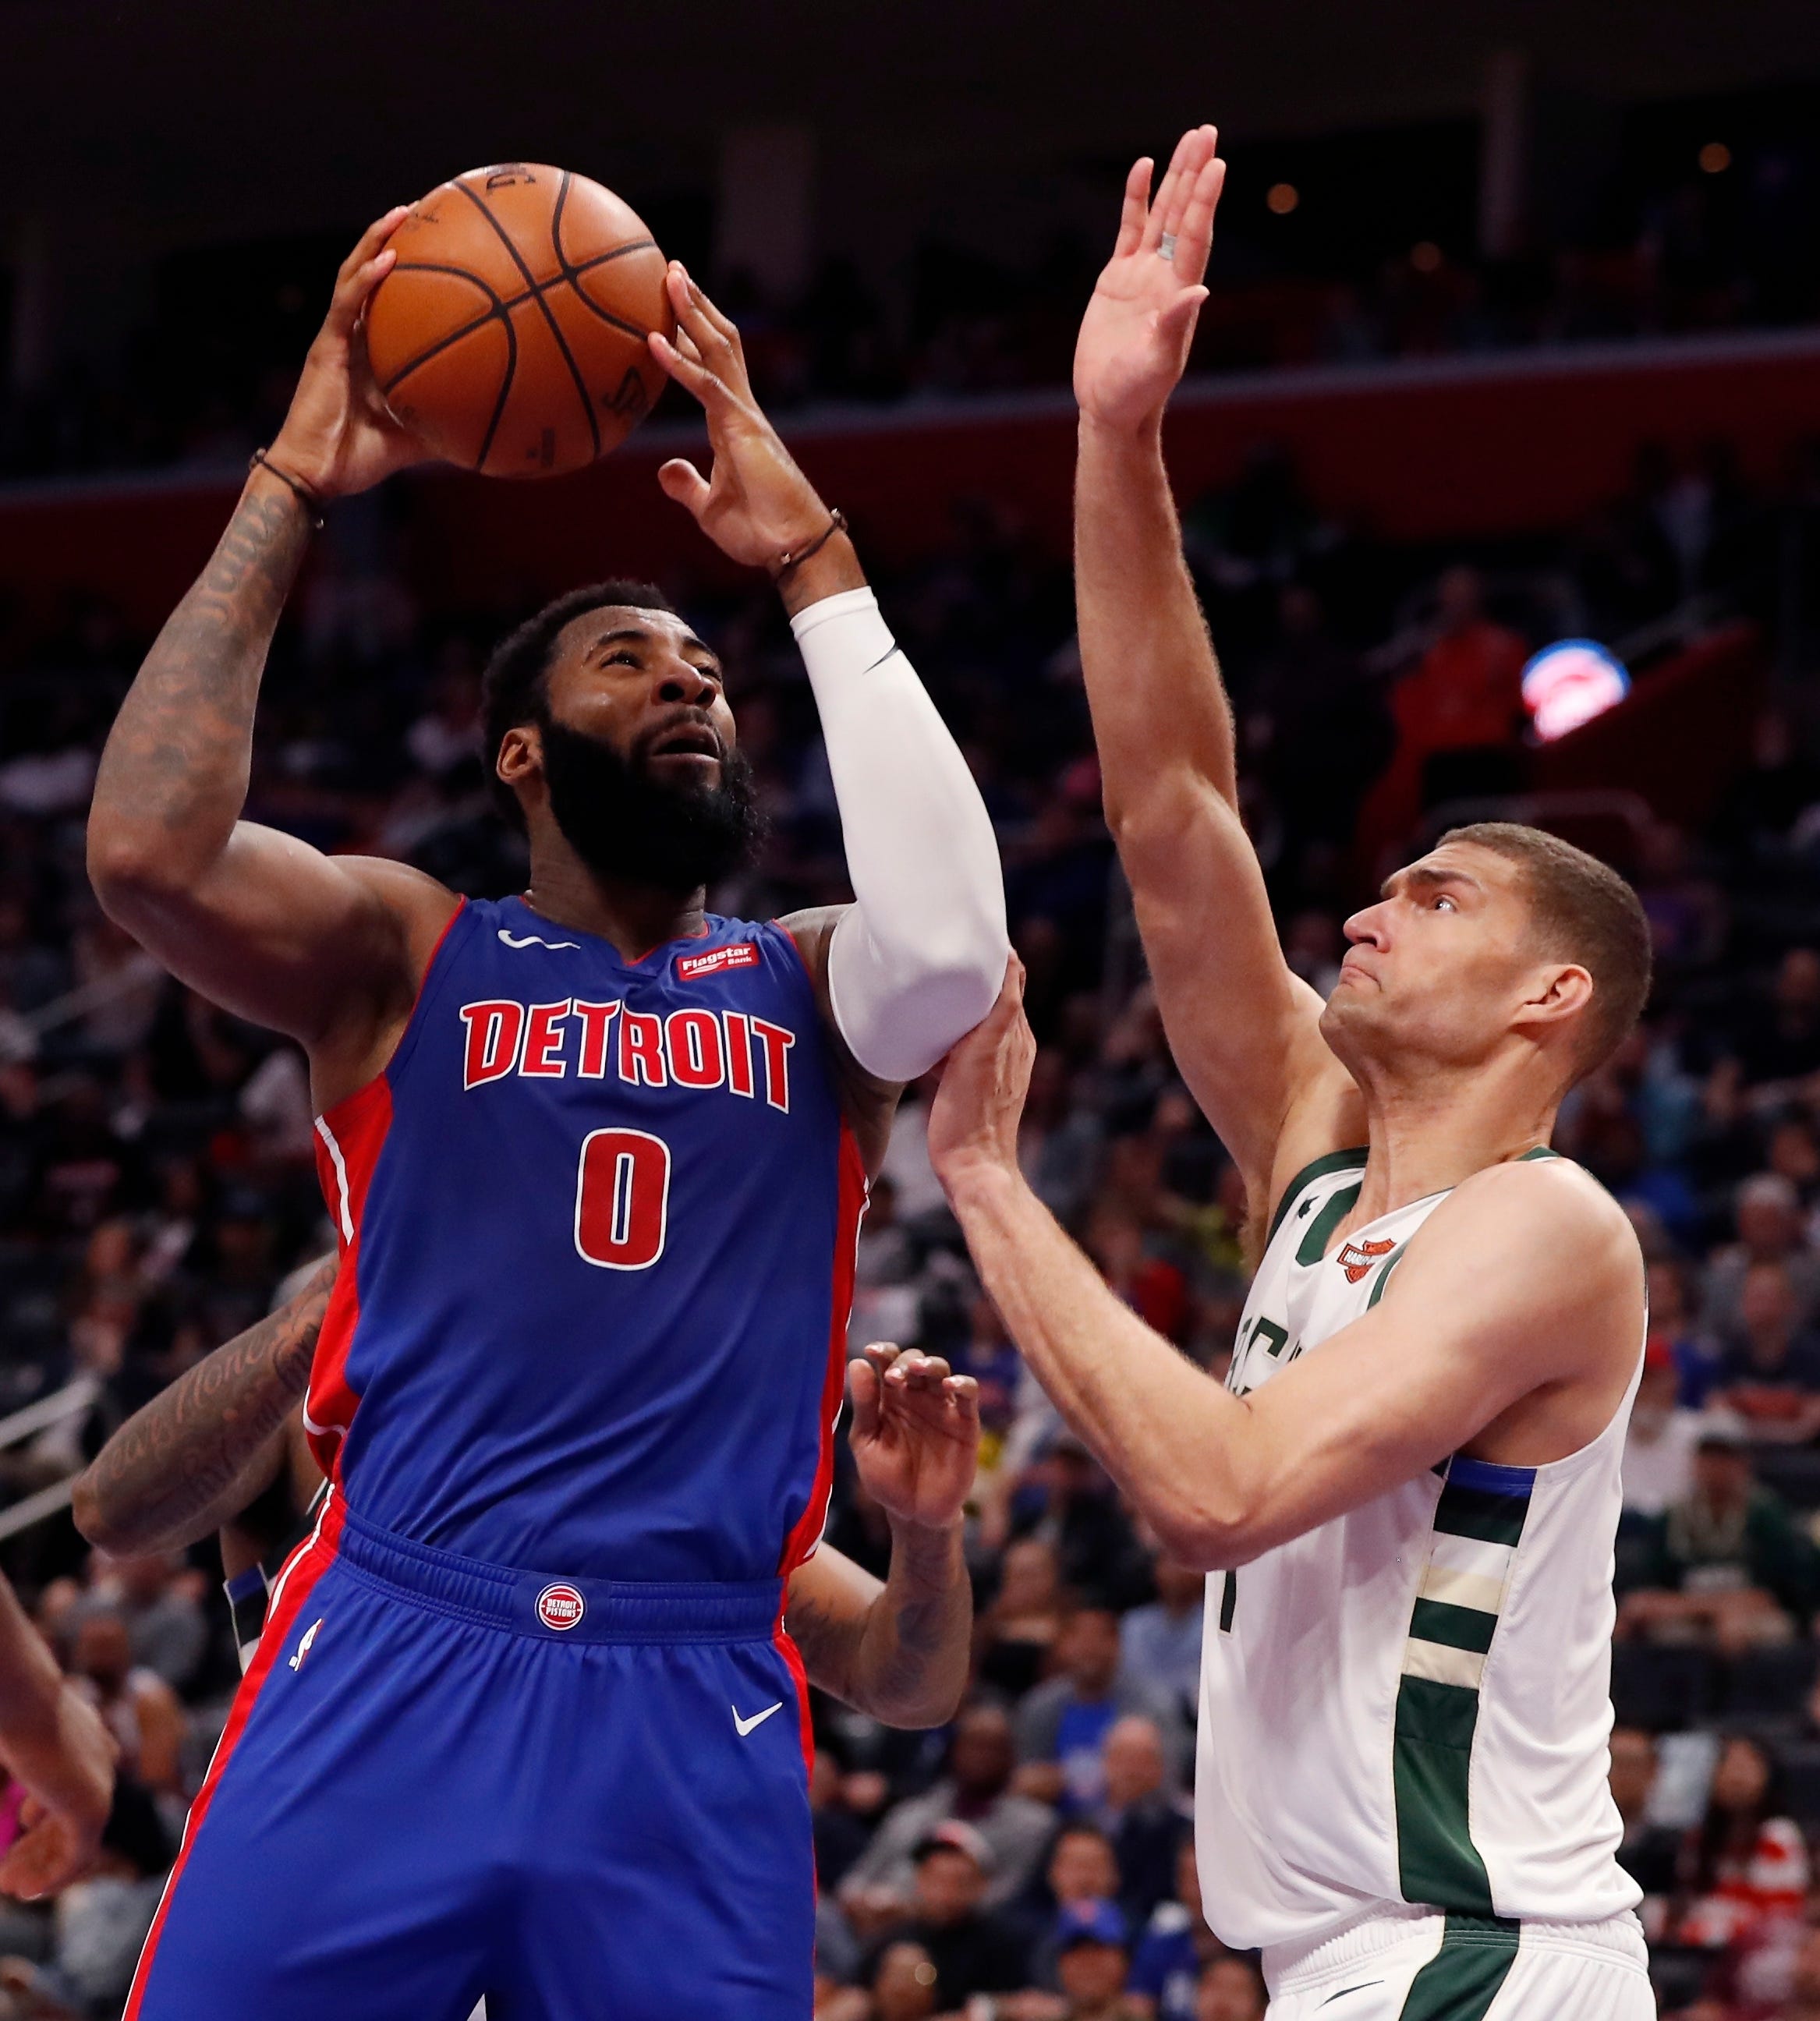 2. C Andre Drummond, age 25: Pistons owner Tom Gores often has spoken of Drummond and Griffin as a duo and plans to keep them together for the foreseeable future. Drummond is the best rebounder in the league and had the best statistical season of his career, with 17.3 points and 15.6 rebounds. He’s just 25 and after this season, he has a player option for $28.8 million next season. That decision will influence the direction of the franchise.